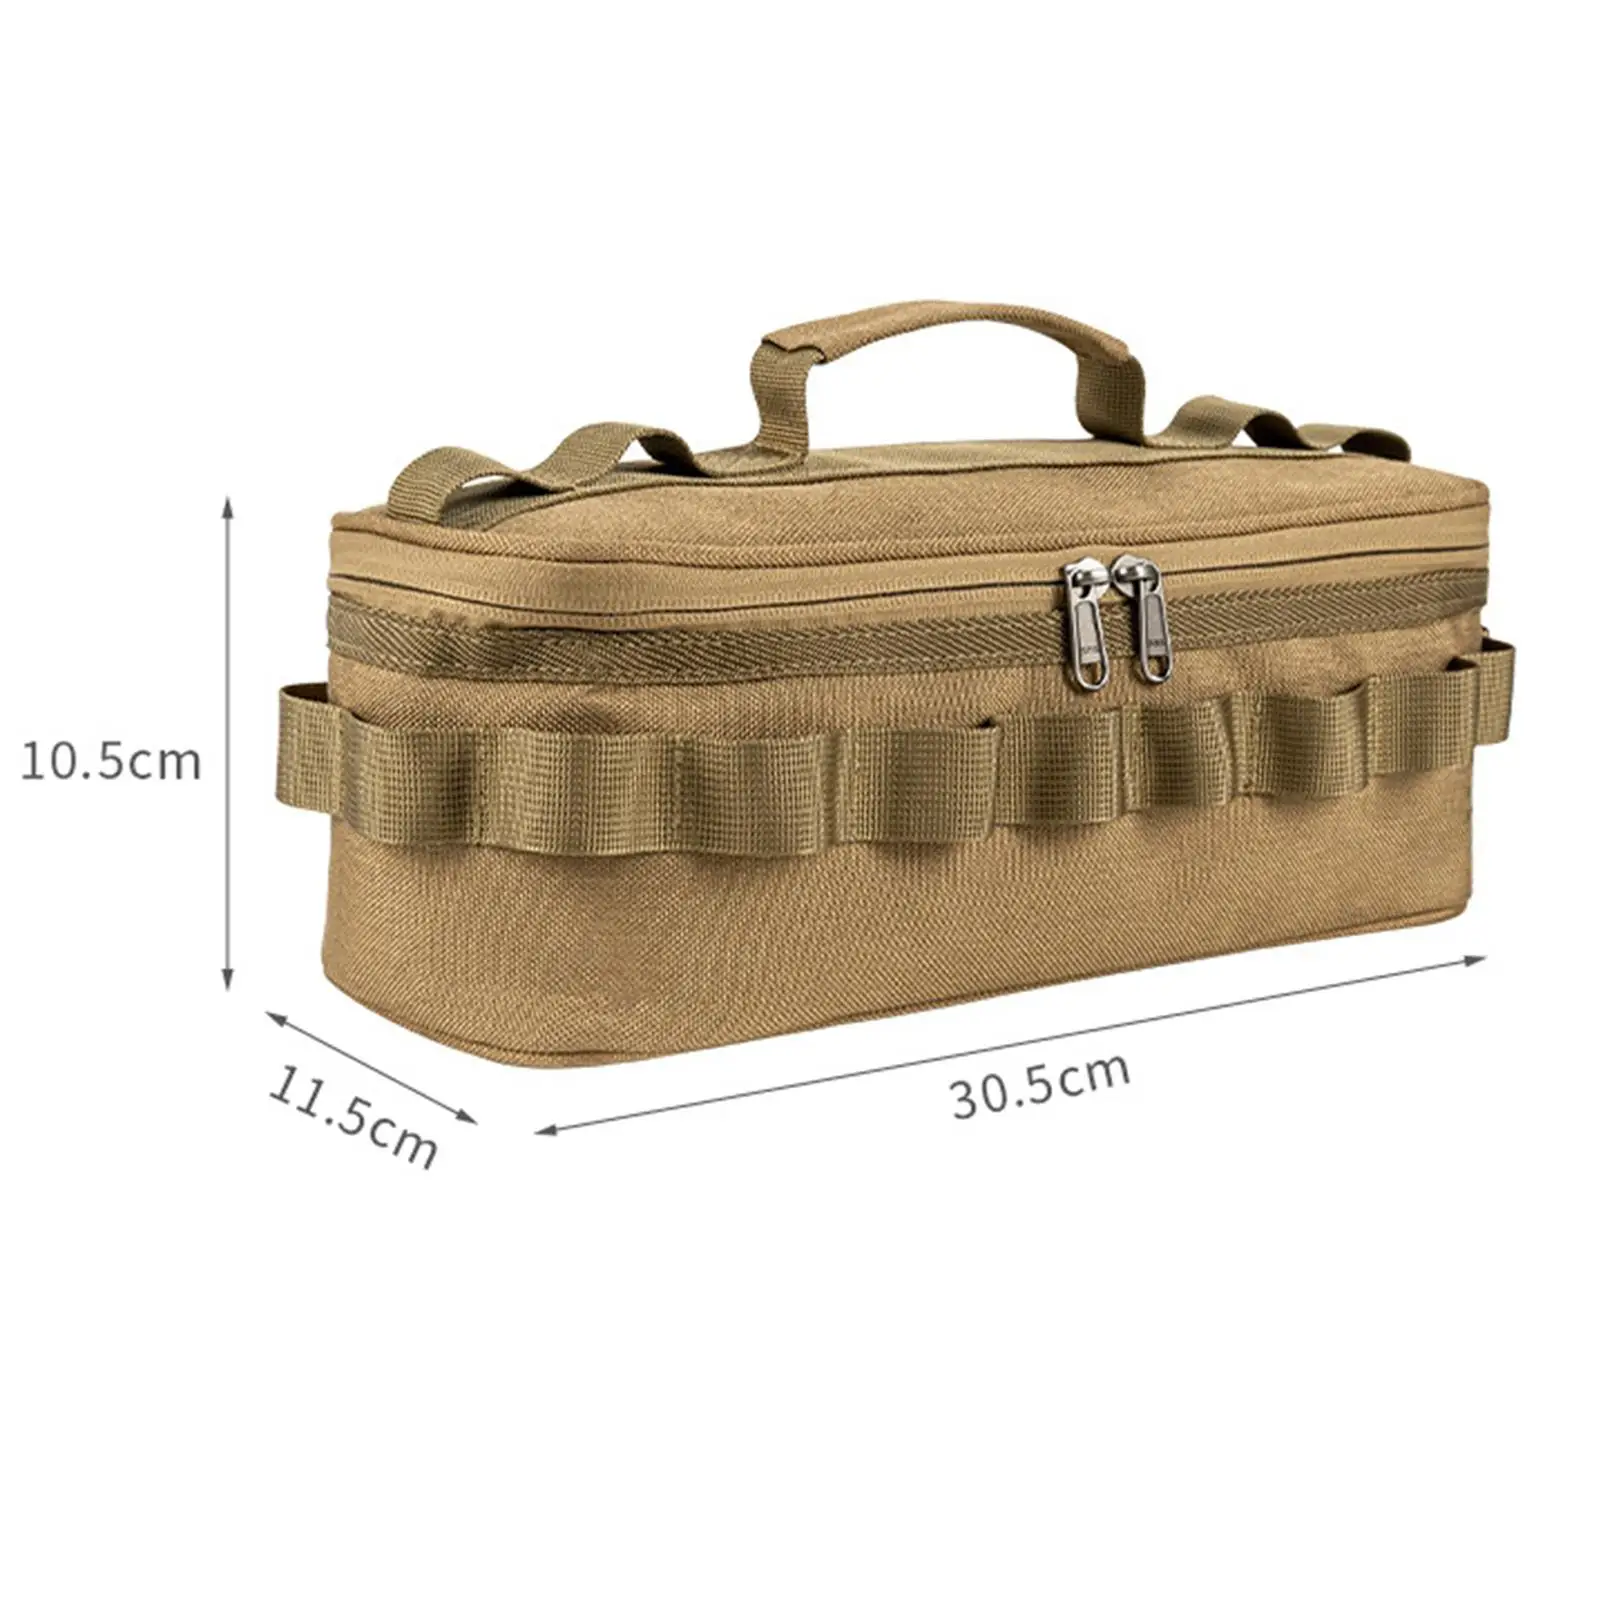 Large Camping Storage Bags Tableware Carry Bag Utility Tote Bag Cookware Organizer Cooking Utensils Pouch for Outdoor BBQ Picnic